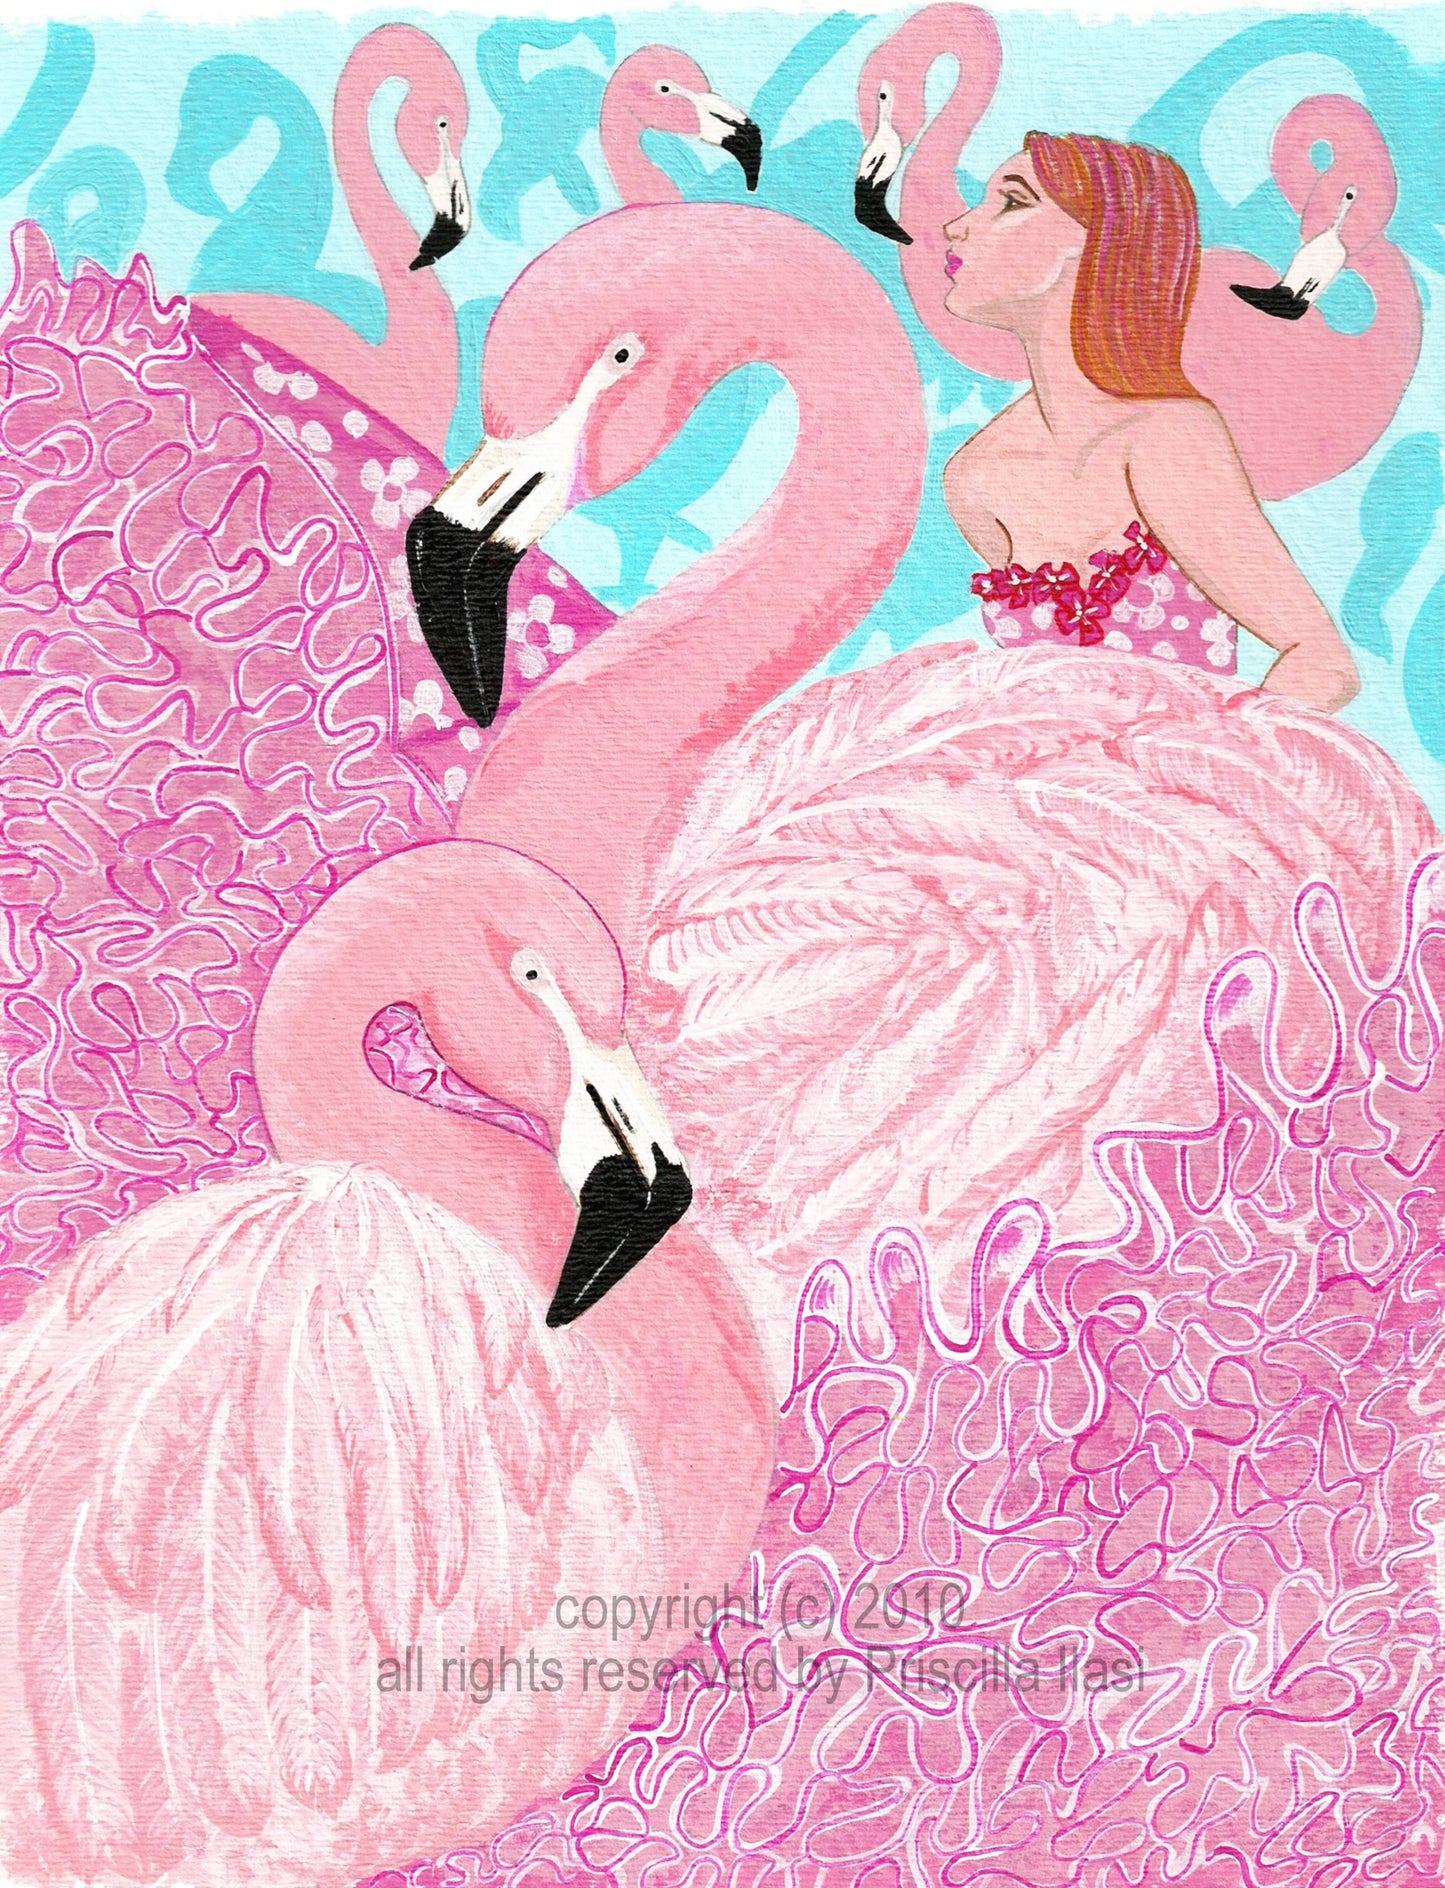 Pink Flamingos and a lady by Priscilla Ilasi. The title is "Pink Ladies"